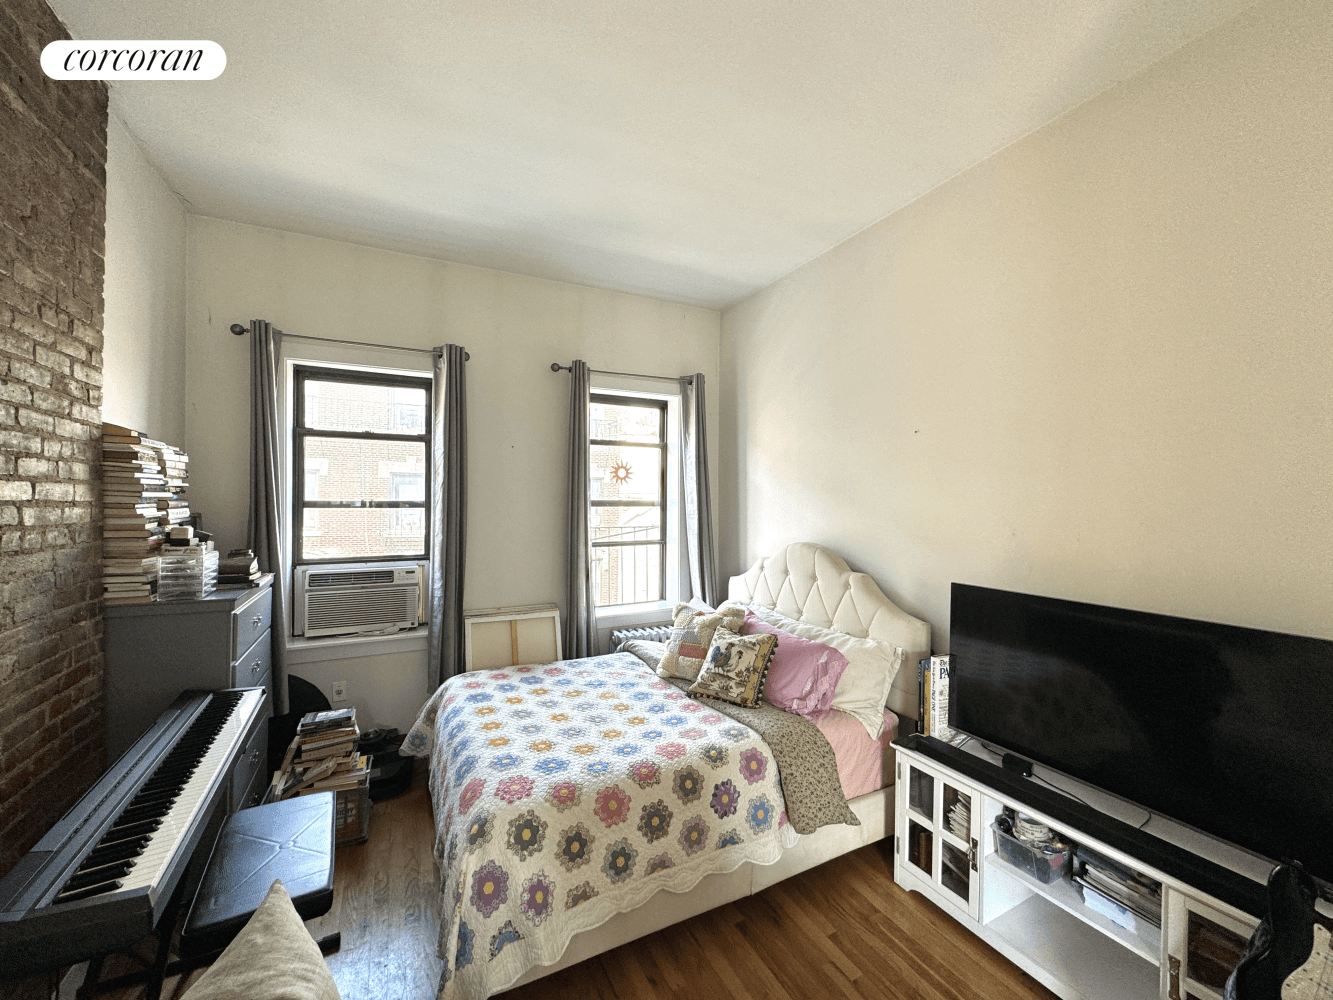 Available 5 15. Spacious, modern studio in prime Soho location just around the corner from some of NYC's best shopping and dining !